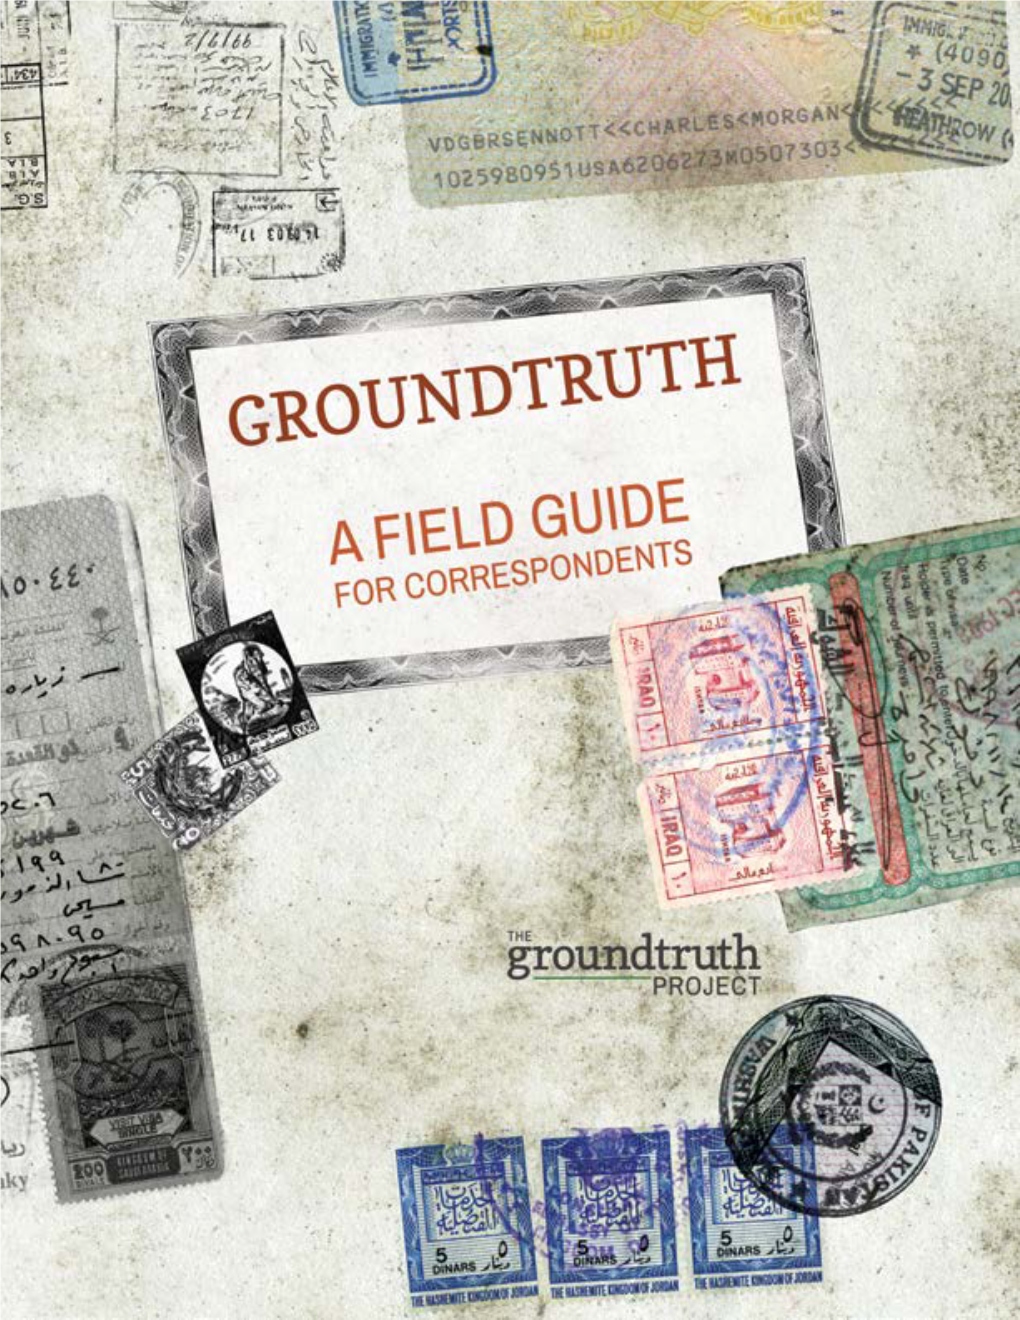 Groundtruth: a FIELD GUIDE for CORRESPONDENTS